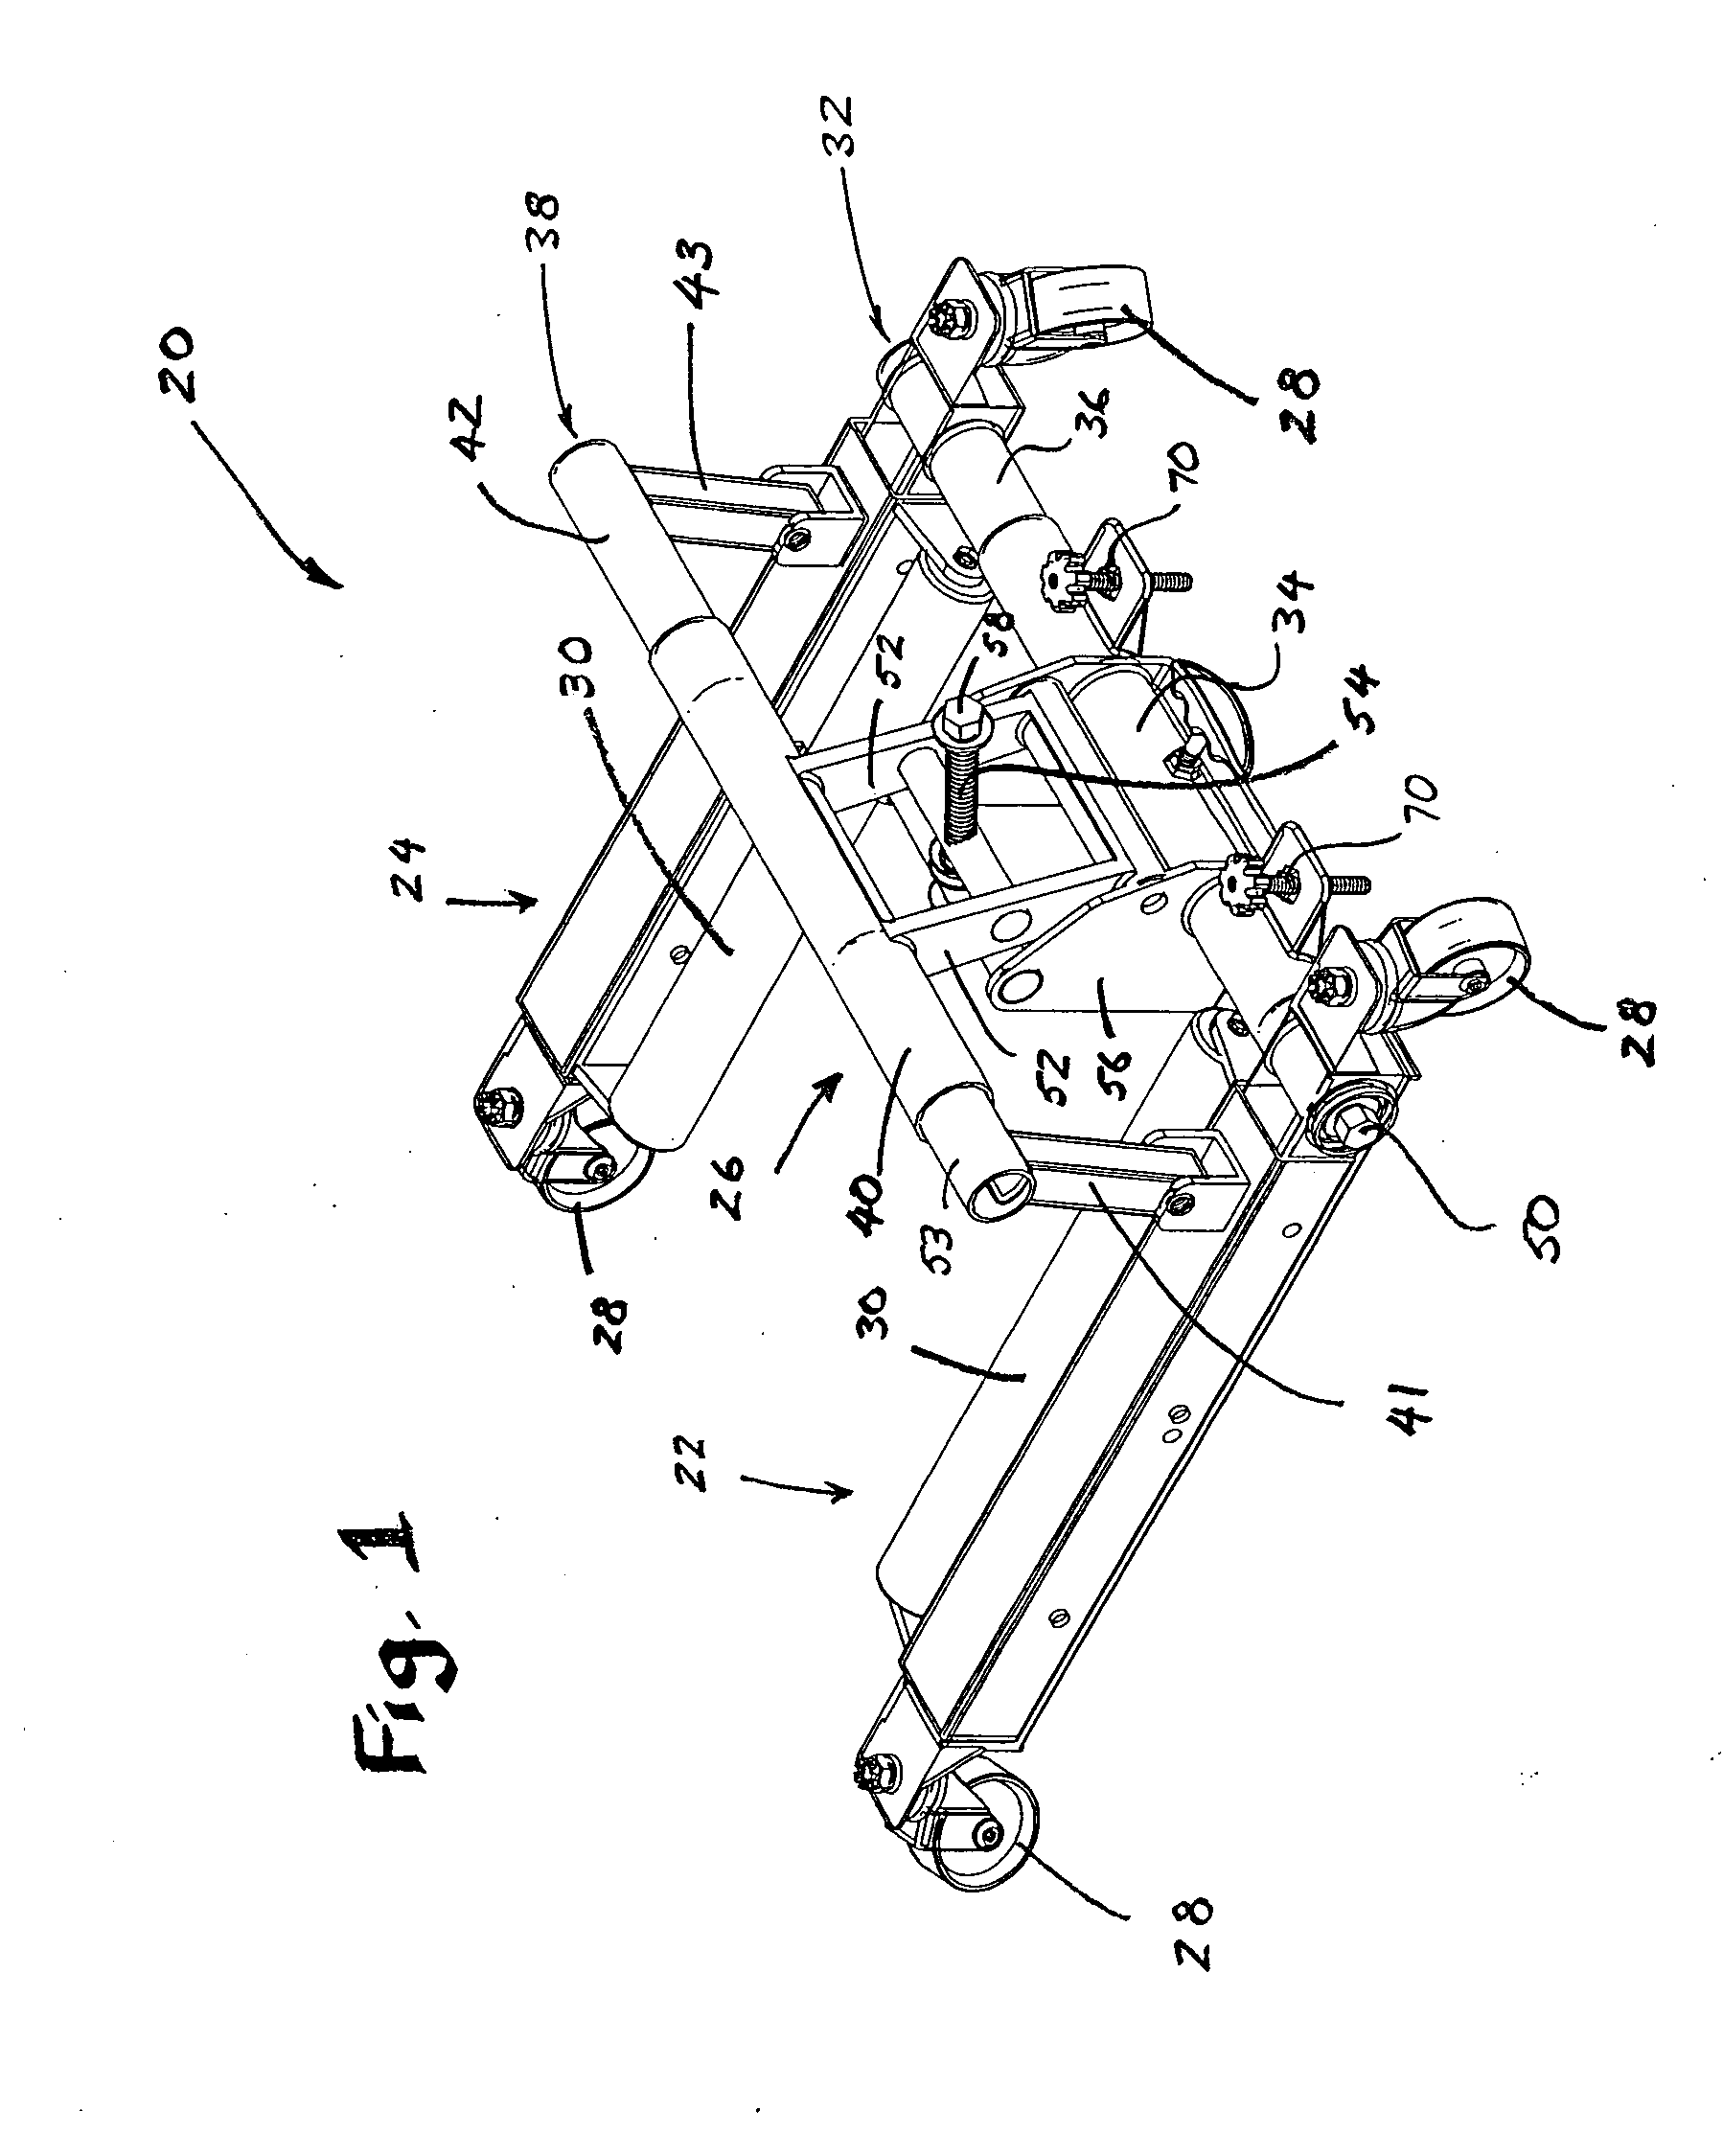 Automobile jack and wheel dolly